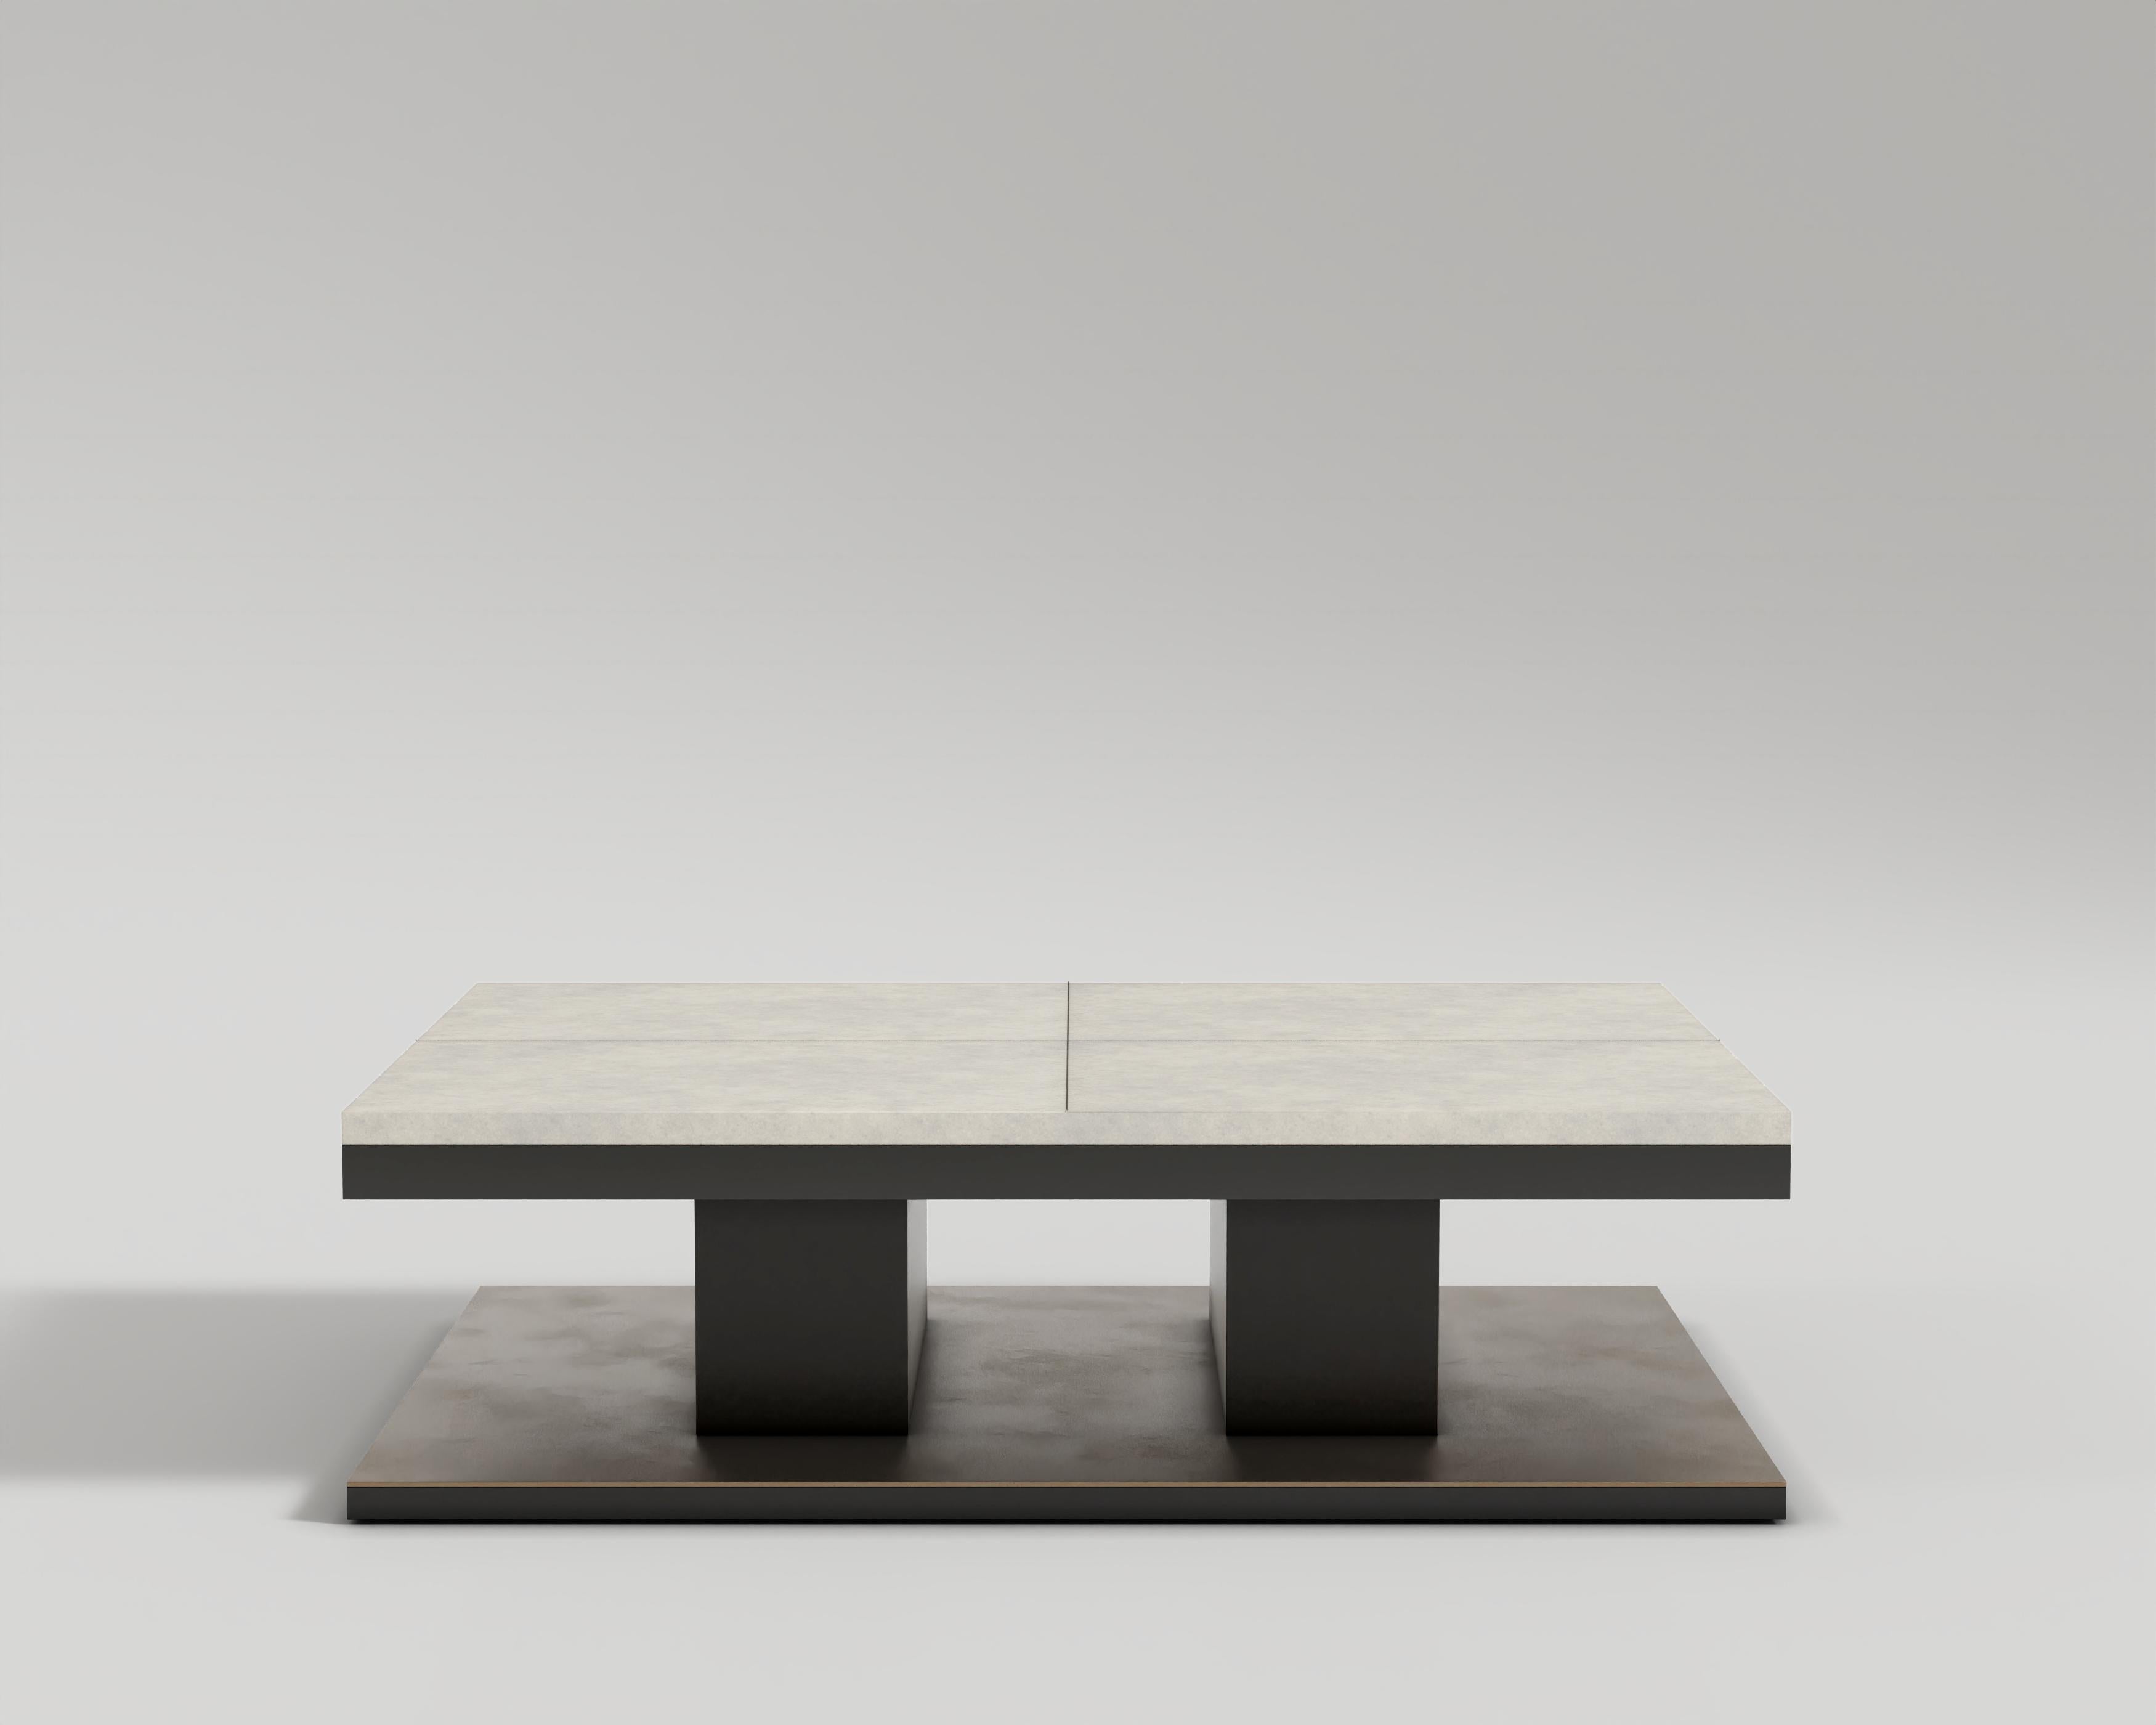 Rec Coffee Table

The Rec coffee table showcases a striking design with a matte black metal body and a tabletop crafted from luxurious white goat skin. The matte black metal exudes a modern and edgy vibe, providing a sturdy and durable foundation